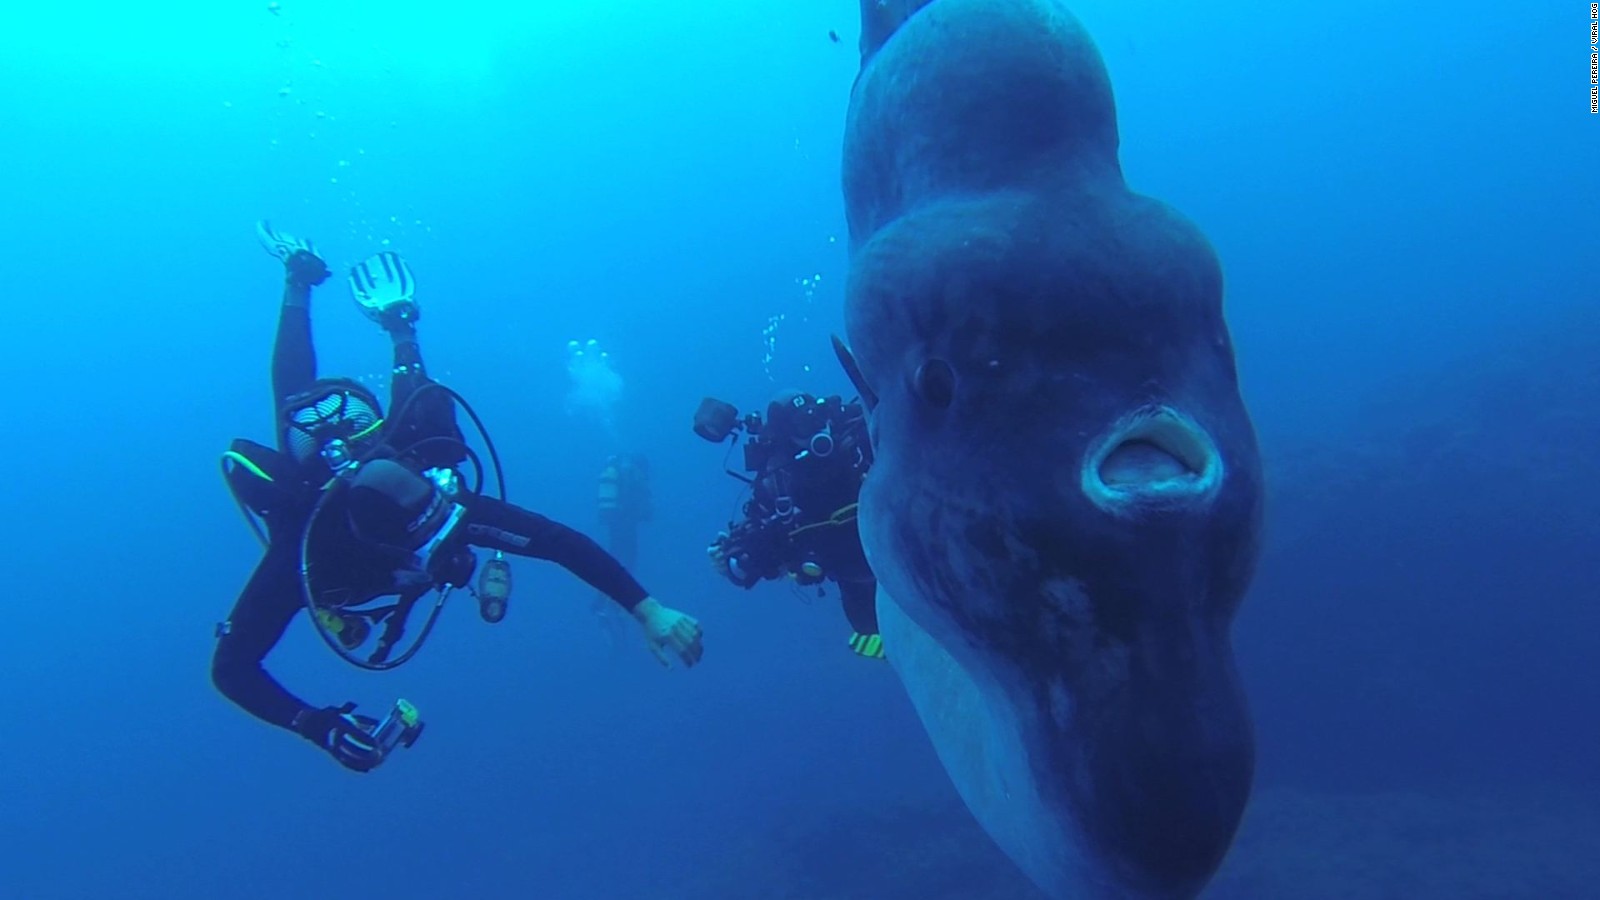 Moonfish in the company of divers